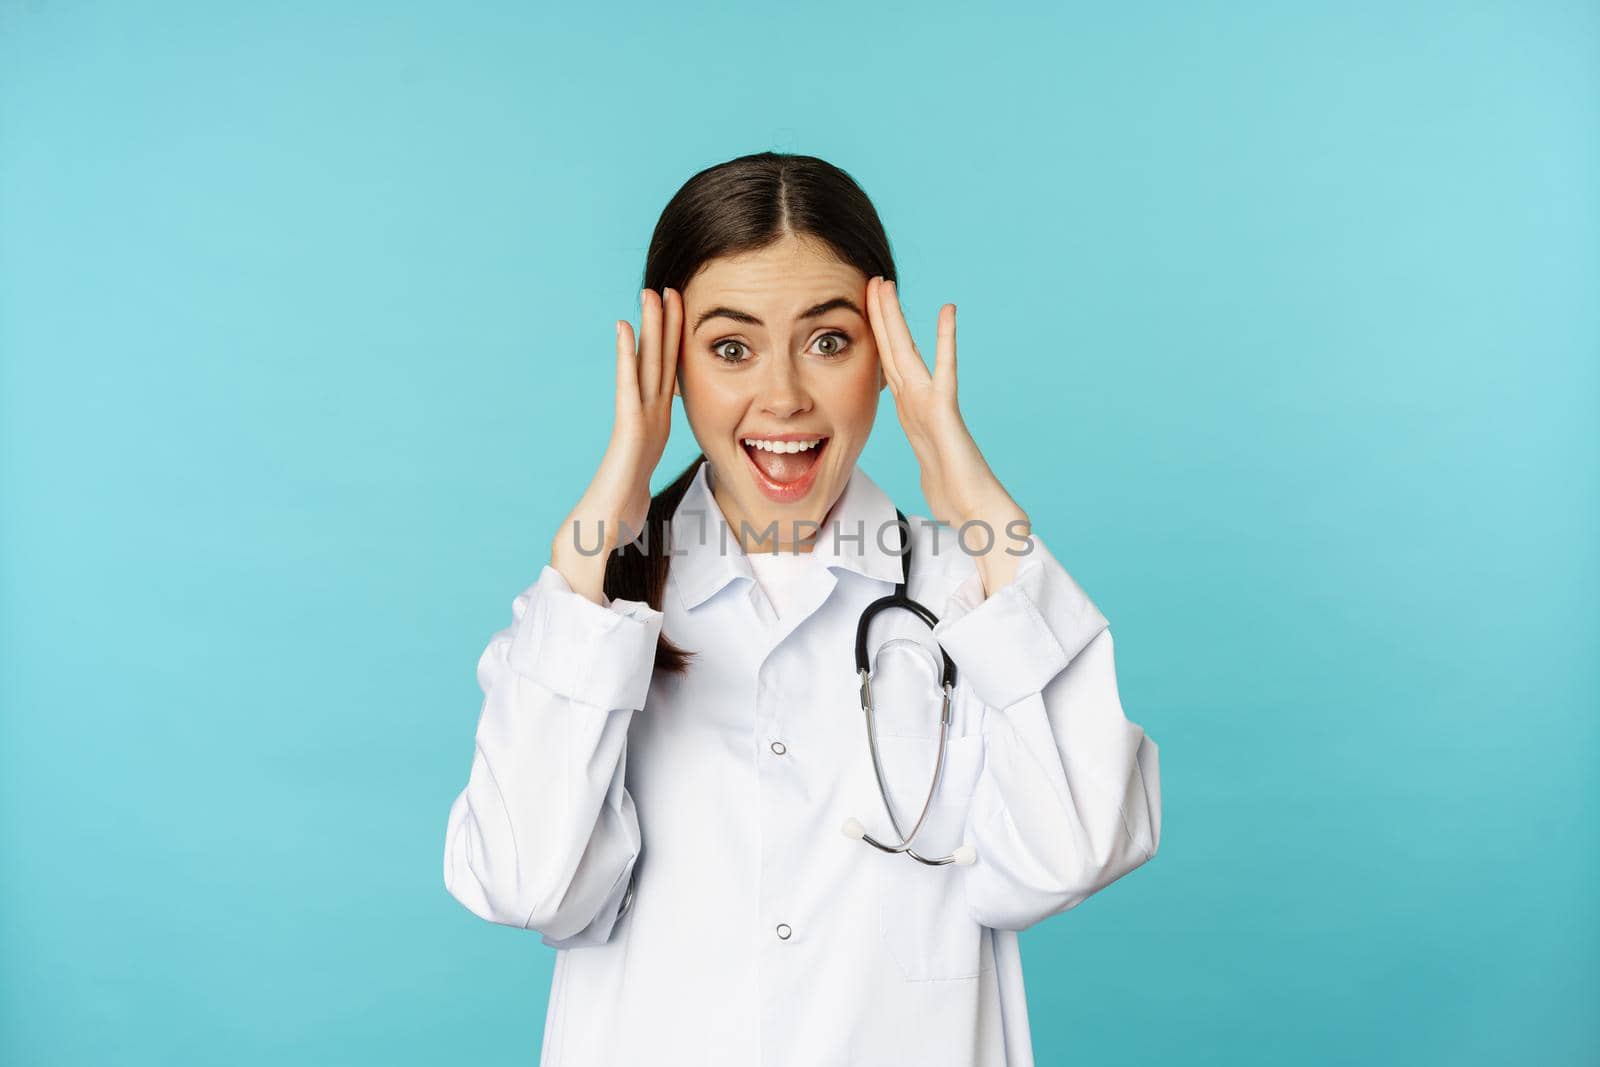 Portrait of surprised and excited smiling doctor woman, holding hands on head, reaction to mindblowing awesome news, standing over blue background.